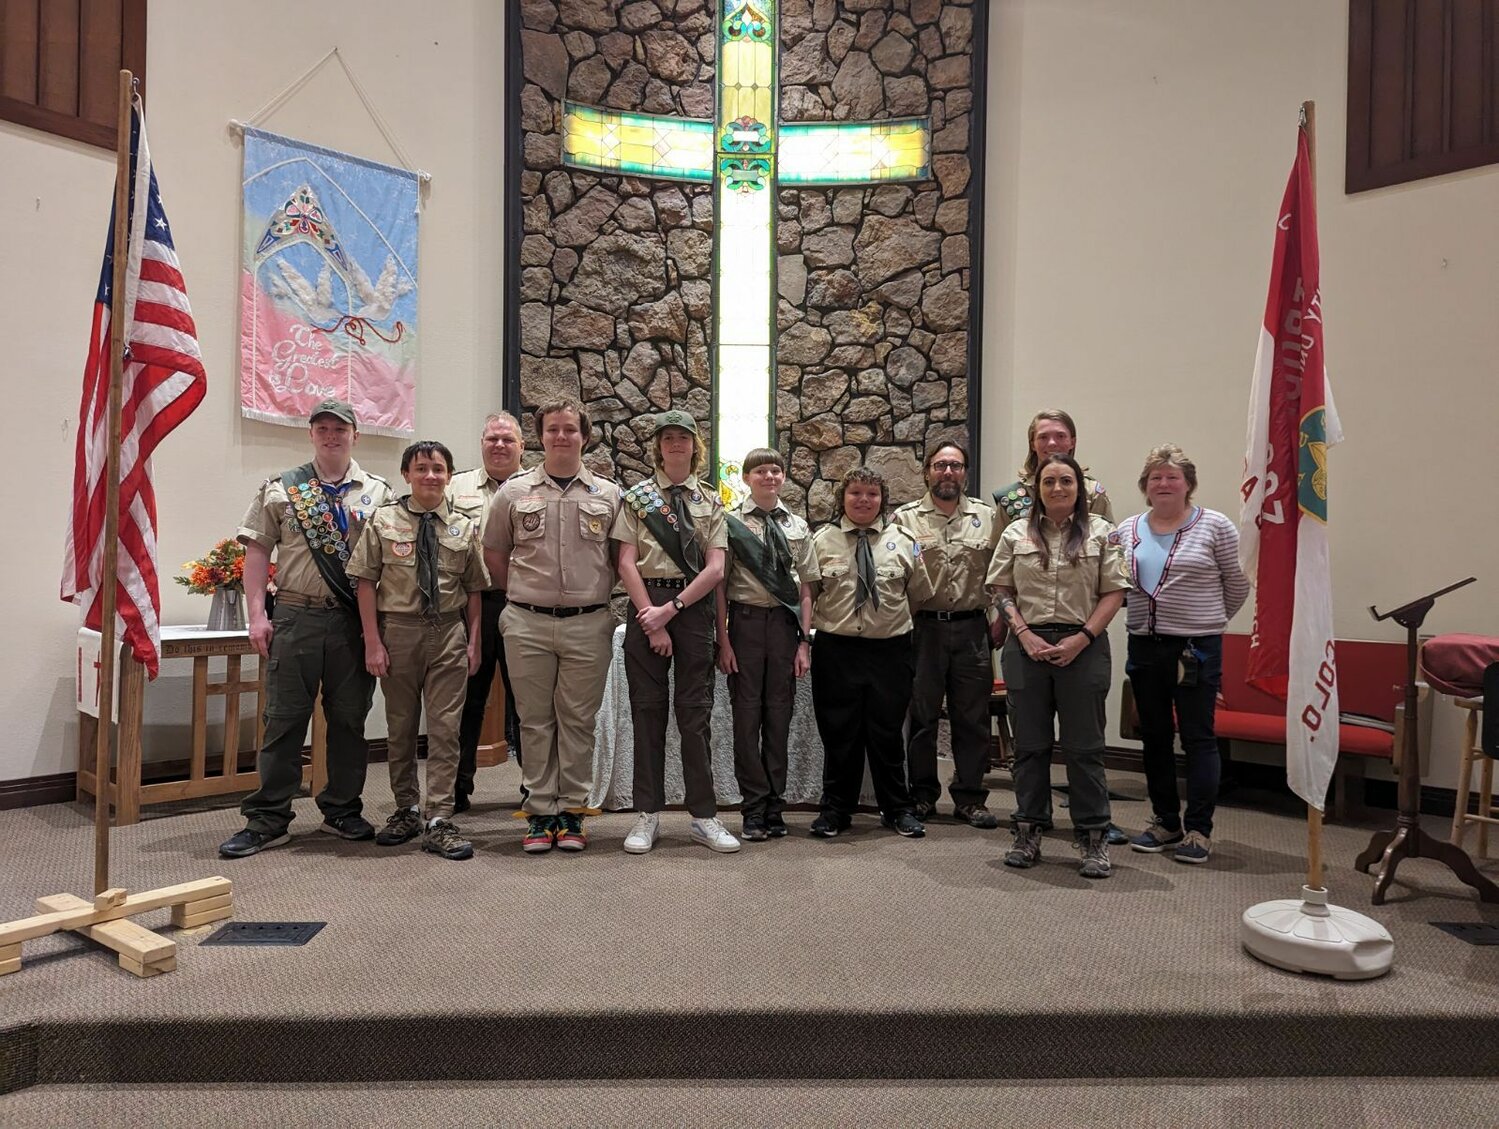 The Scouts from Boy Scout Troop 807 are recognized for their recent achievements at the Court of Honor on Jan. 29. The Scouts were recognized for advancing in rank and merit badges that have been completed. Pictured left to right are: Koltin Bassett, Skyler Zarate, Tim Walterscheid (assistant Scoutmaster), Davian Coss, Bennett Walterscheid, Bruce Kubelka, Milagro Munoz, David Zarate (assistant Scoutmaster), Peyton Jackson, Jennifer Walterscheid (Scoutmaster) and Julie Ashbaugh (advancement chair).
Troop 807 will be hosting its second annual fundraiser dinner on Feb. 24. The dinner will be held at the Community United Methodist Church at 5:30 p.m. If you are interested in attending, please RSVP to (970) 946-8687.